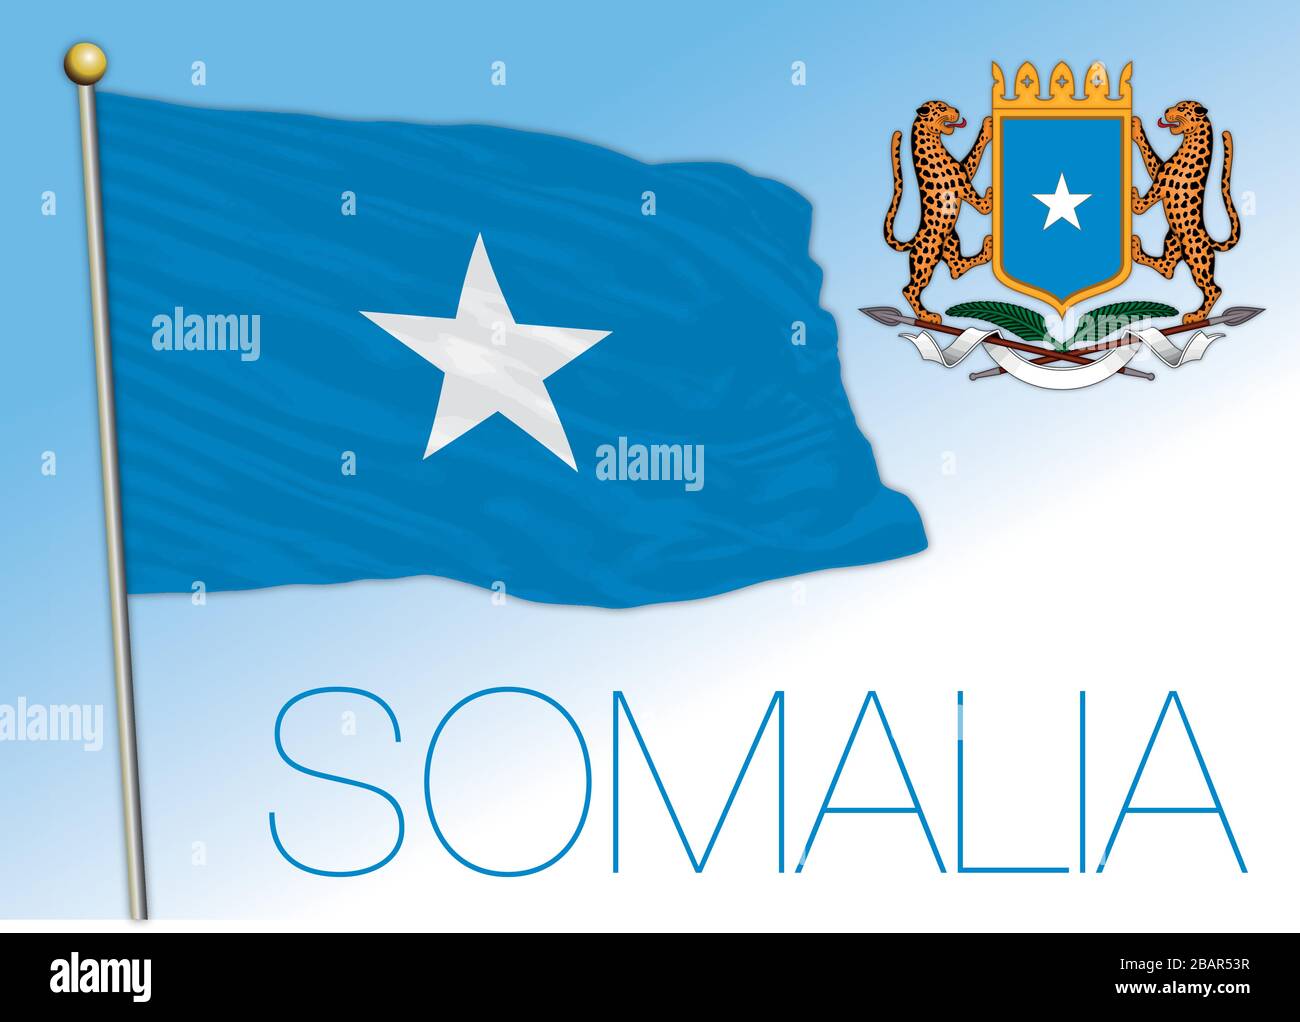 Somalia official national flag and coat of arms, african country, vector illustration Stock Vector